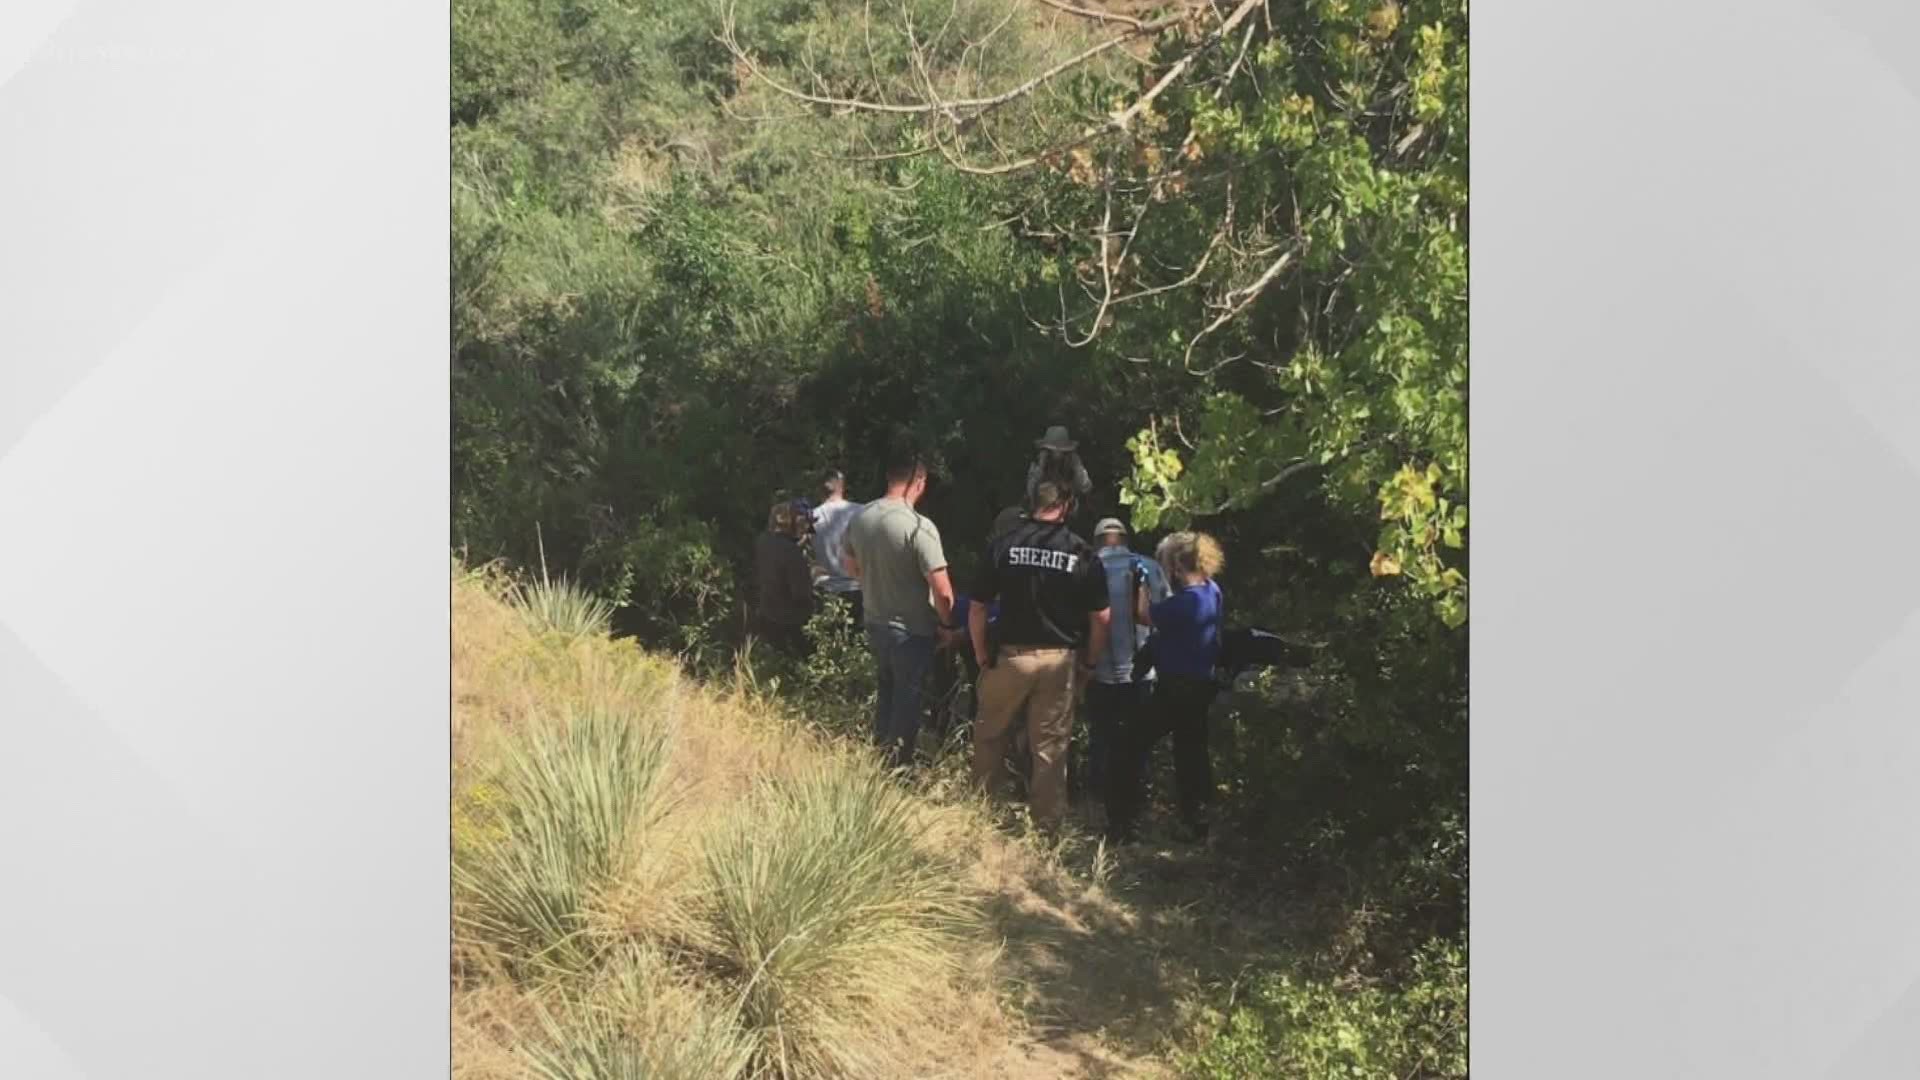 The Douglas County Sheriff's Office (DCSO) is investigating after a human skull and other bone fragments were discovered at a disc golf course in Highlands Ranch.